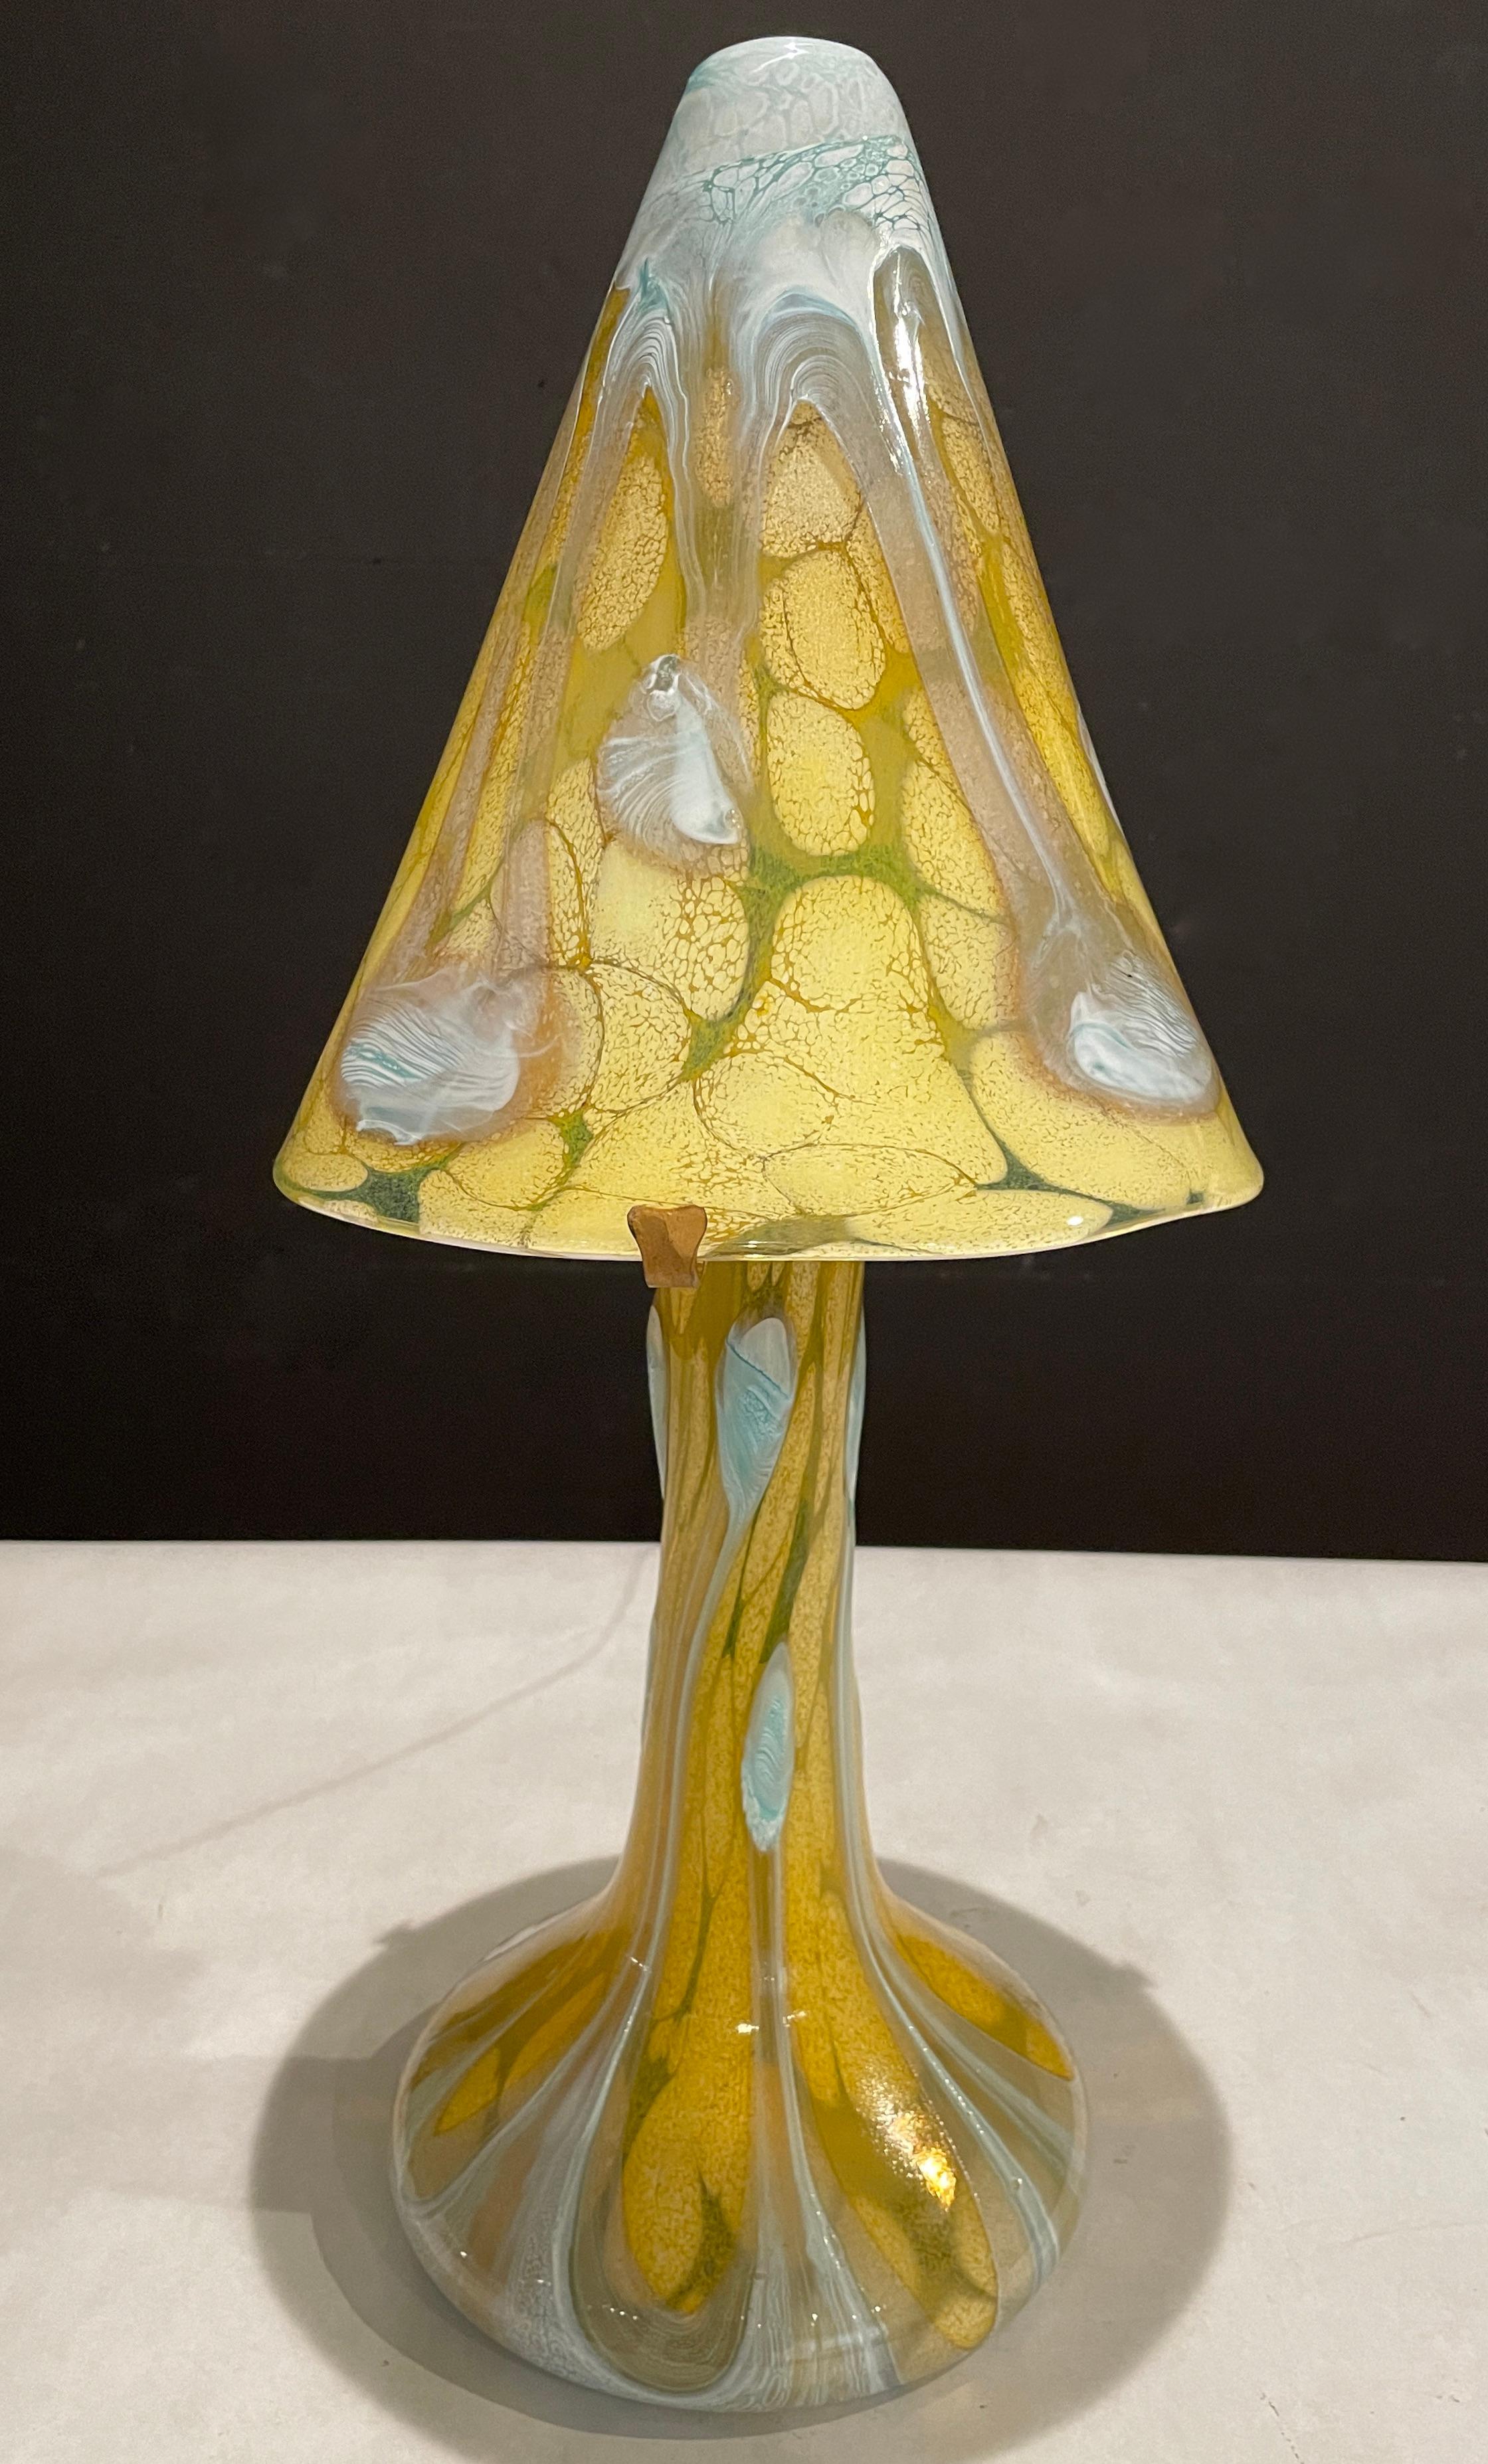 Jean Luc Gambier ( 1948-) signed and dated '06 modern art glass lamp and shade in golden yellows with blues and whites.
Jean  Luc Gambier studied at the school of glass in  Moulins, France, and graduated Top of his  class in 1967. He has worked at